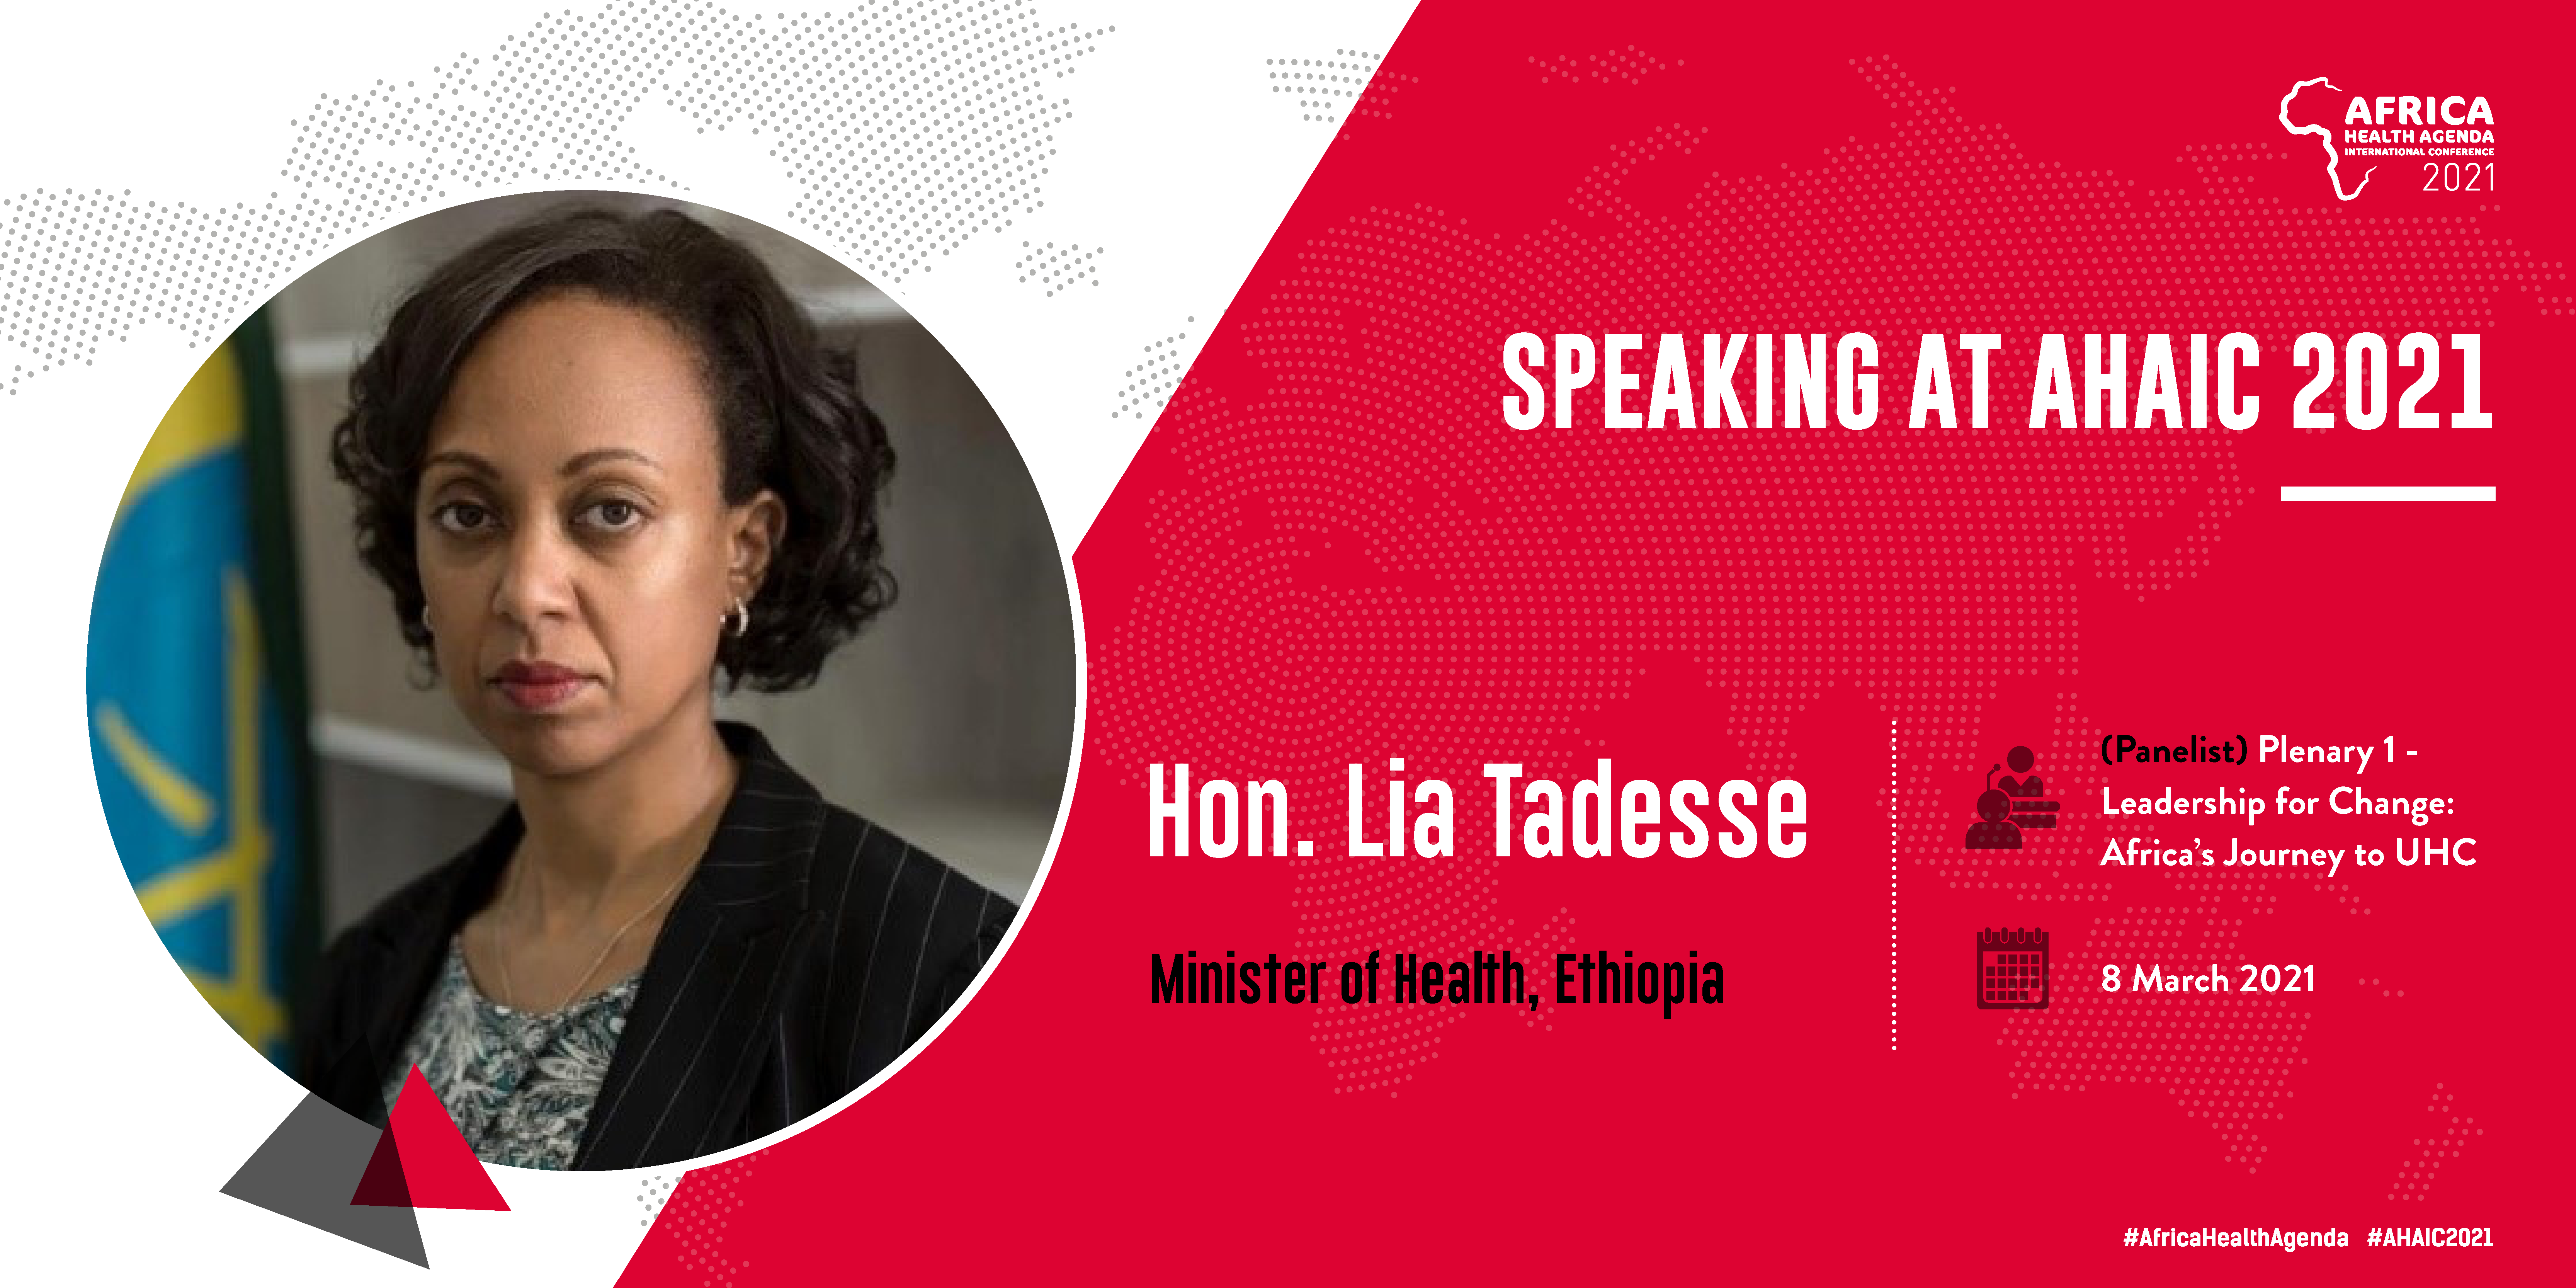 Hon. Lia Tadesse - Speaking at AHAIC 2021 Conference